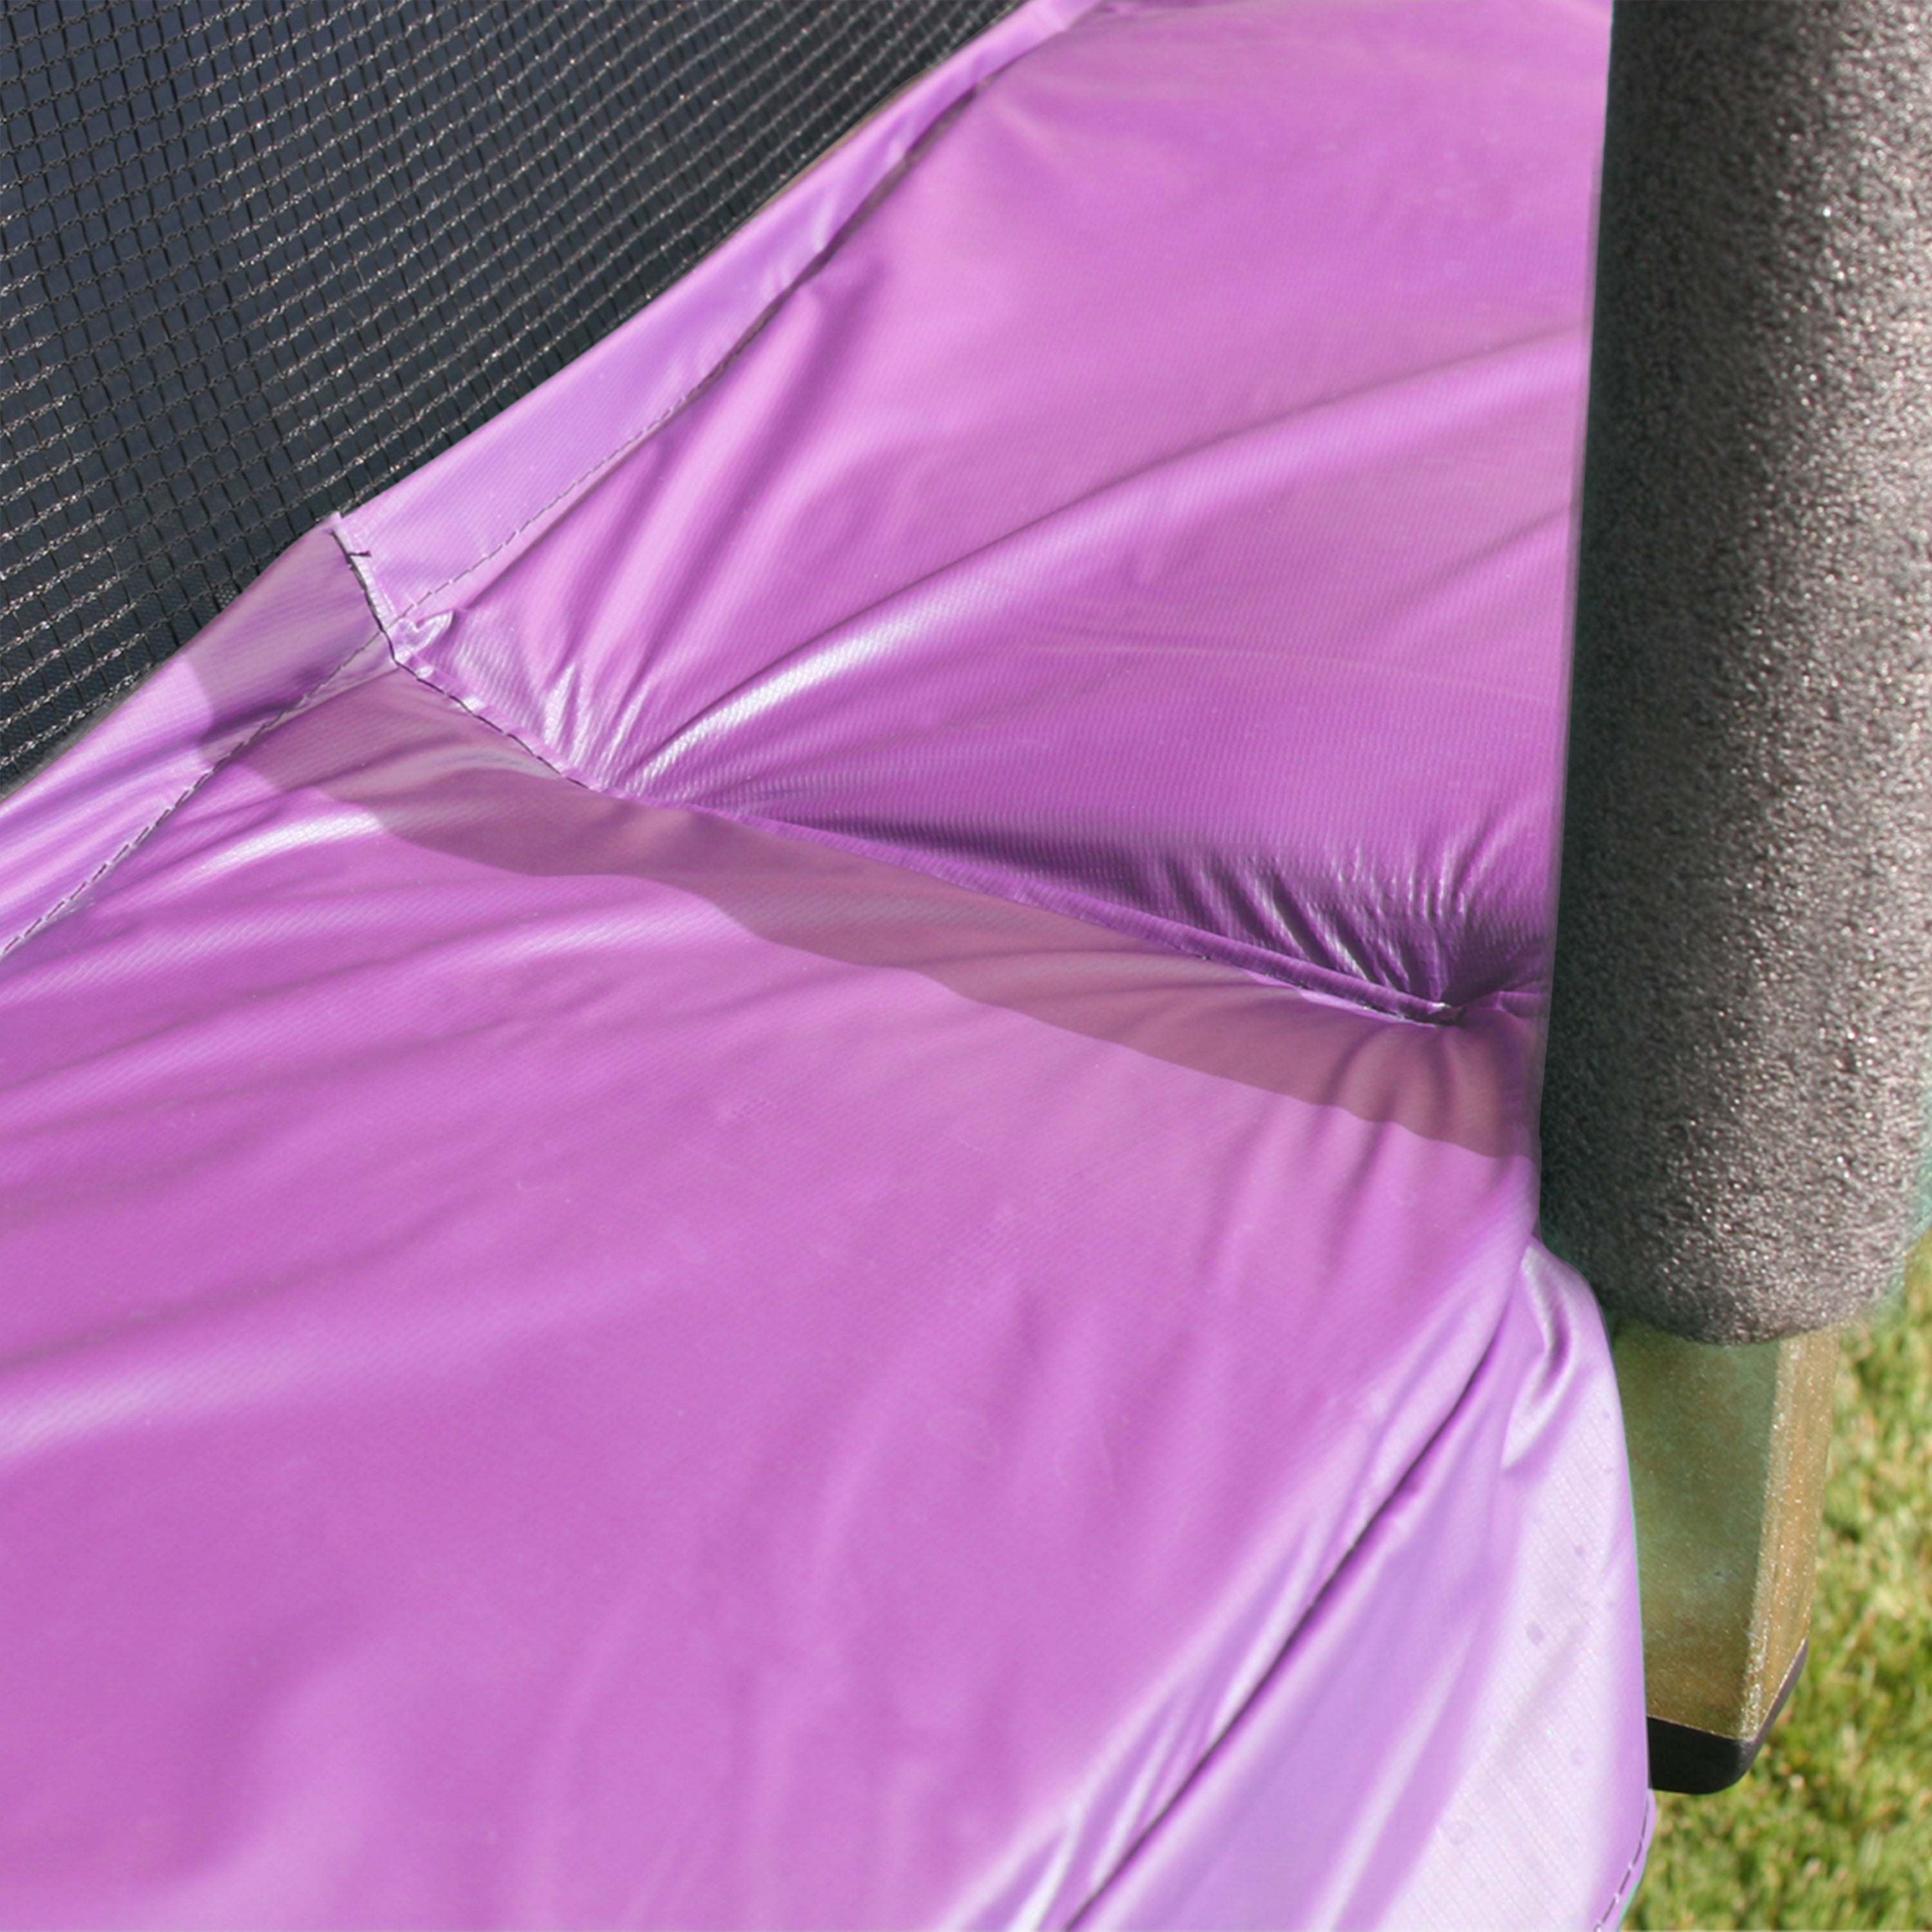 Purple PVC spring pad installed on a trampoline. 